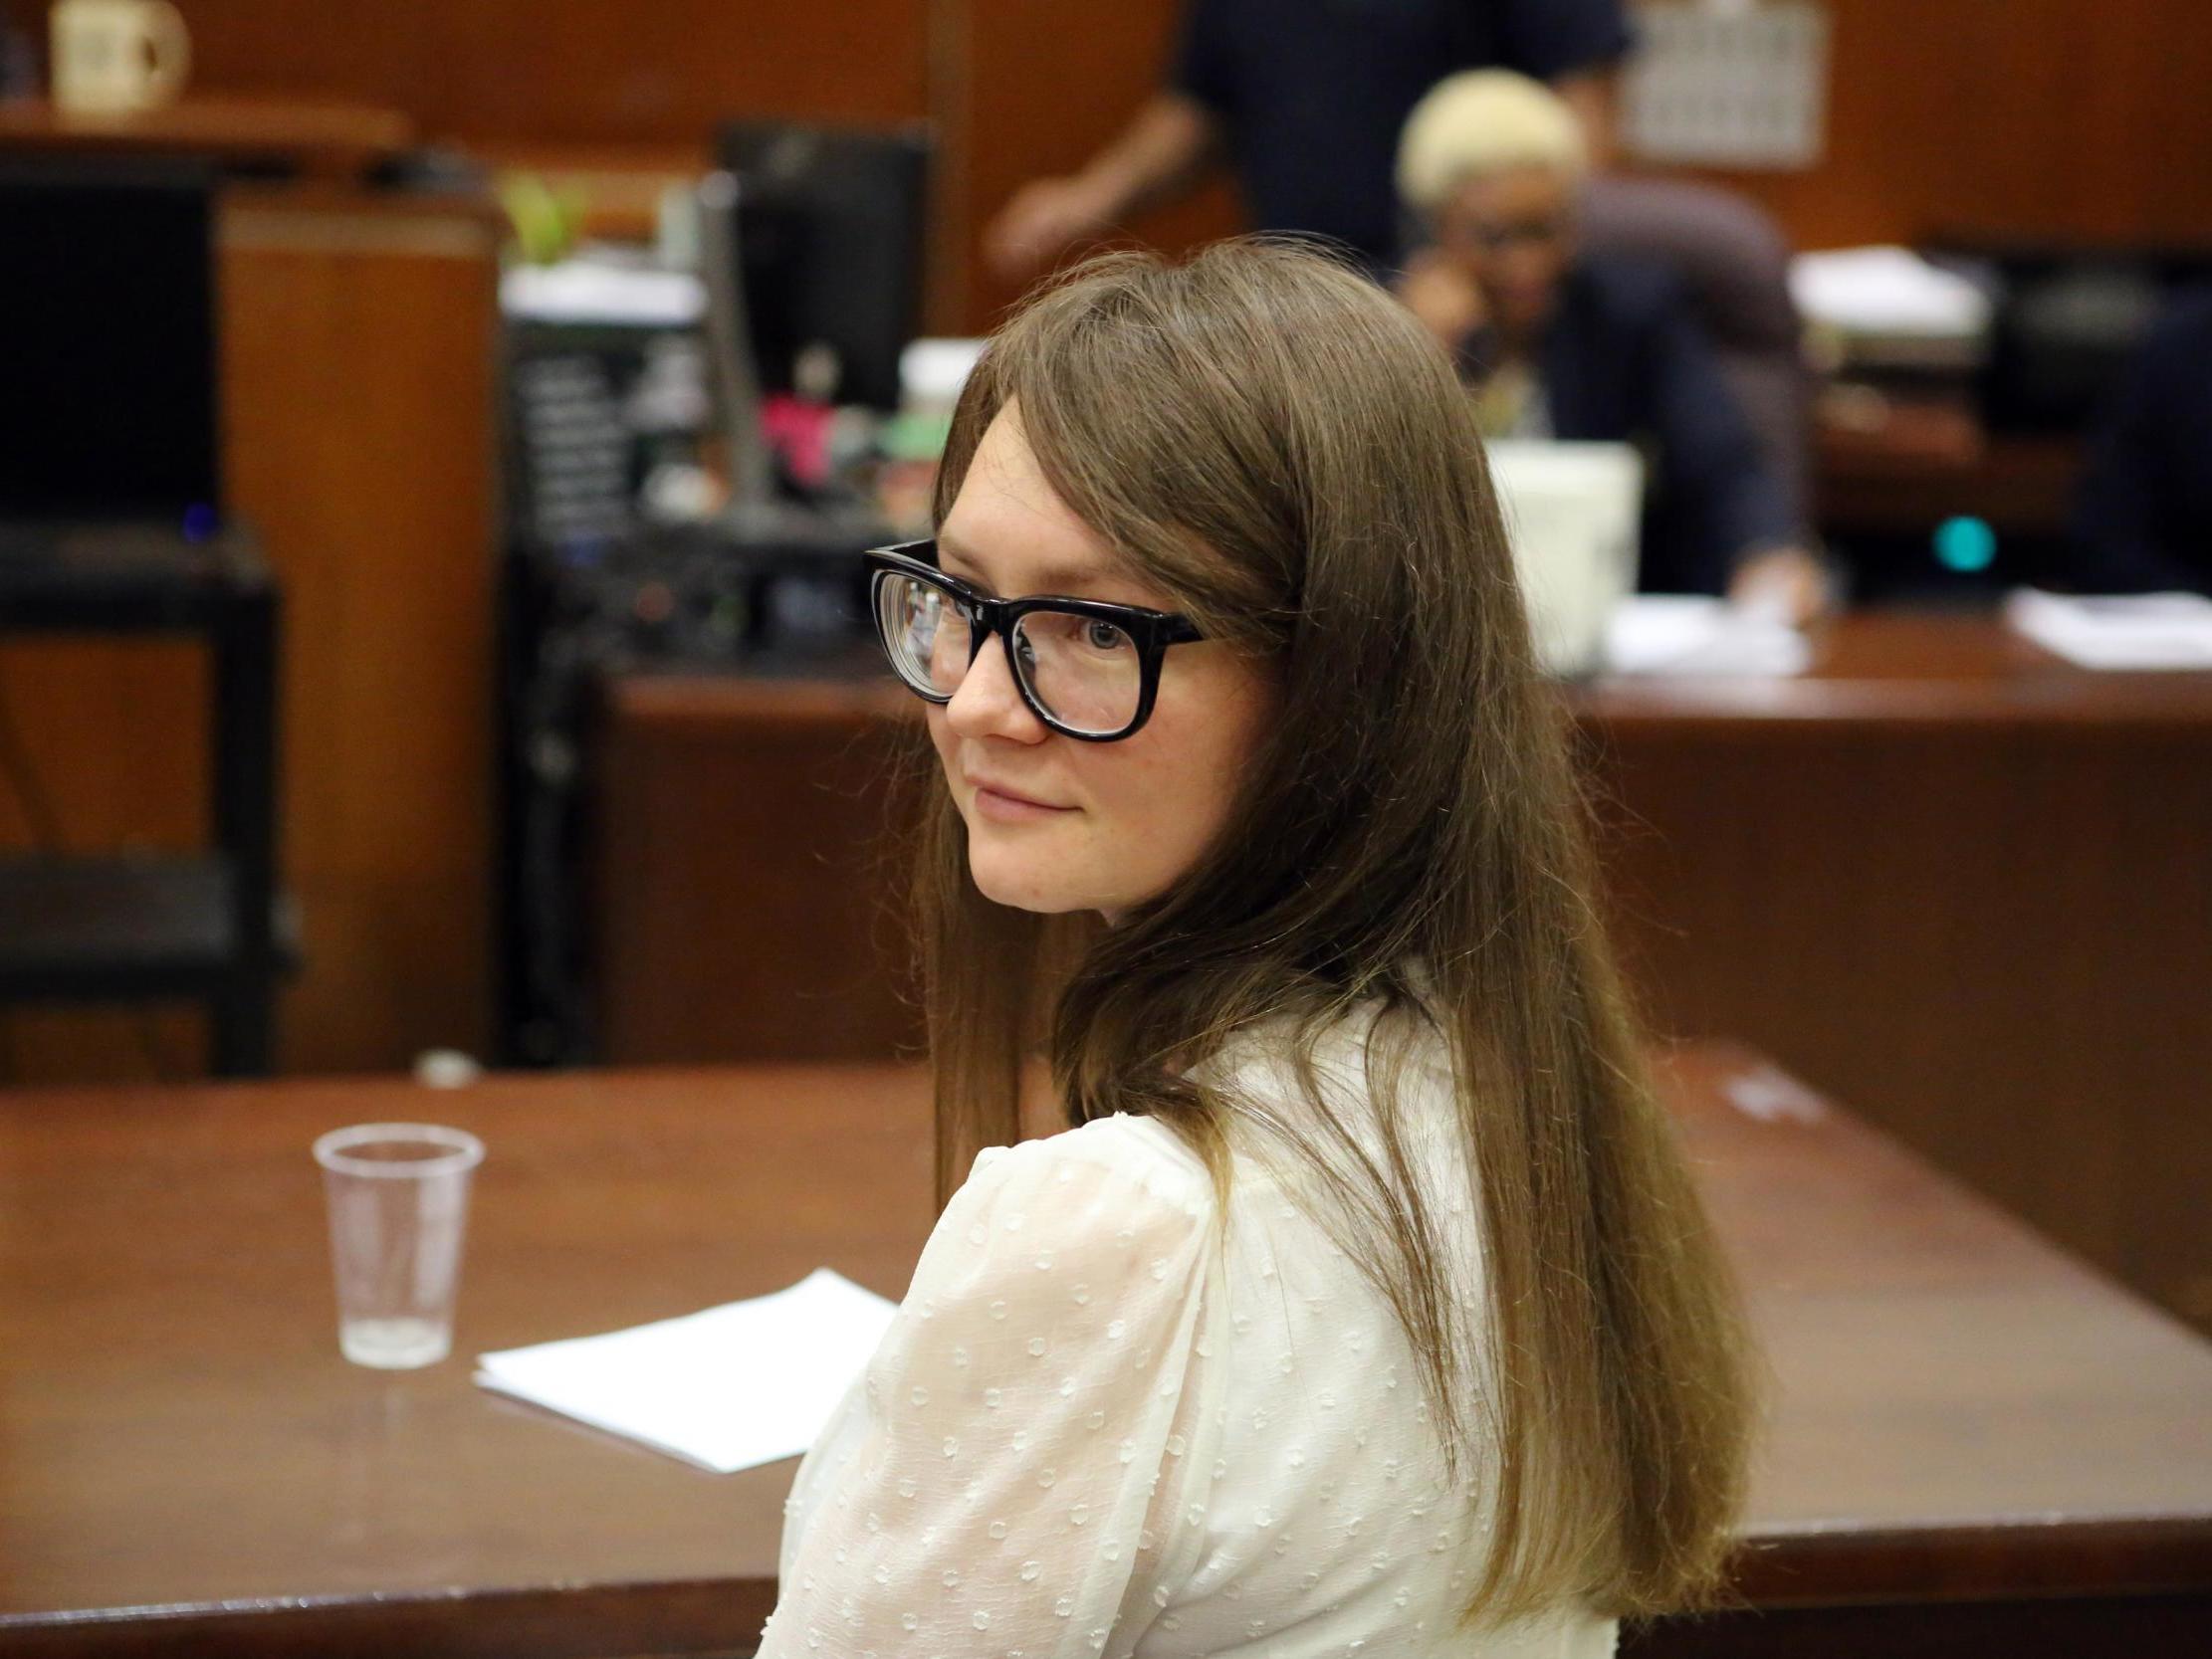 Anna Sorokin trial Impostor heiress who swindled New York elite found guilty of fraud The Independent The Independent